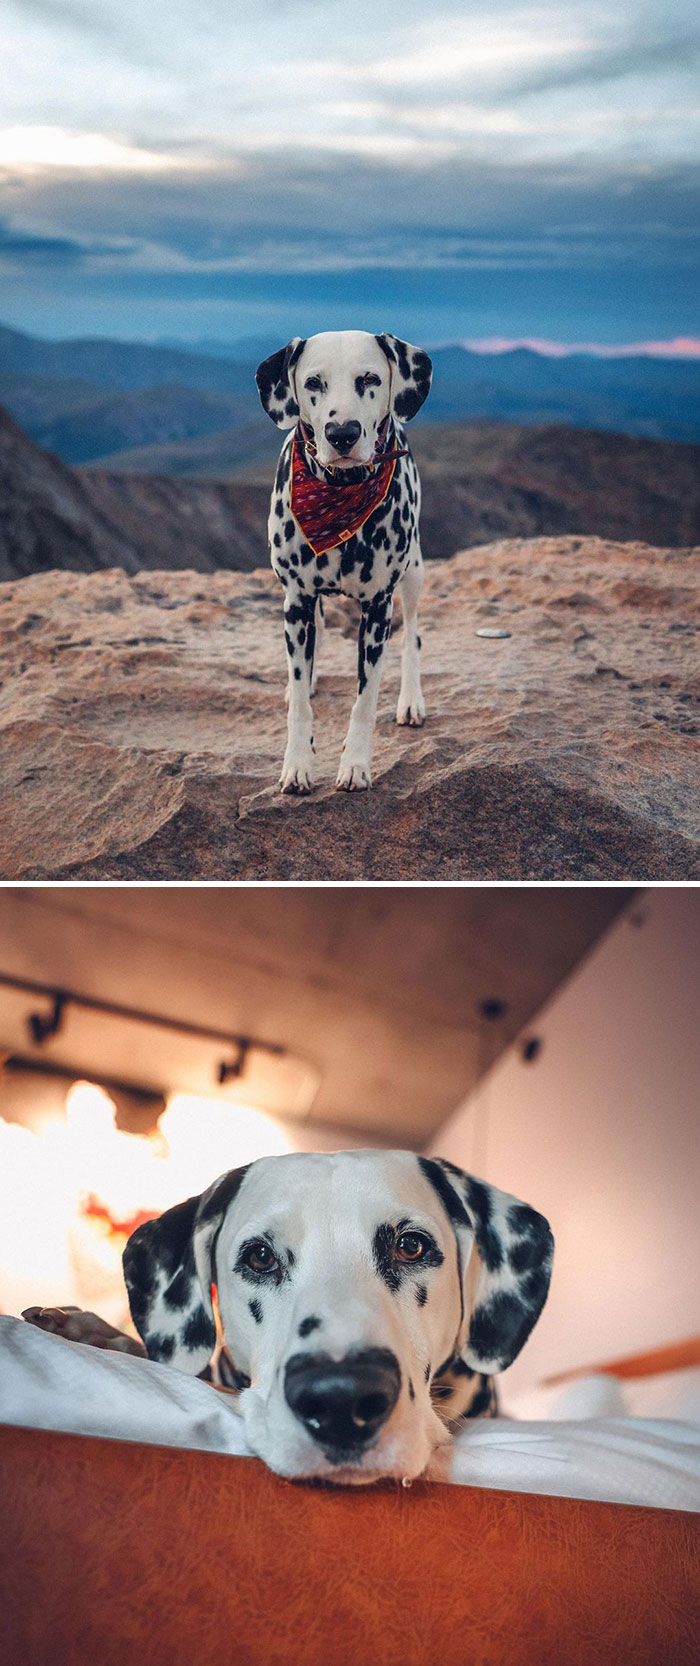 Meet Wiley, The Dalmatian Puppy With A Heart-Shaped Nose